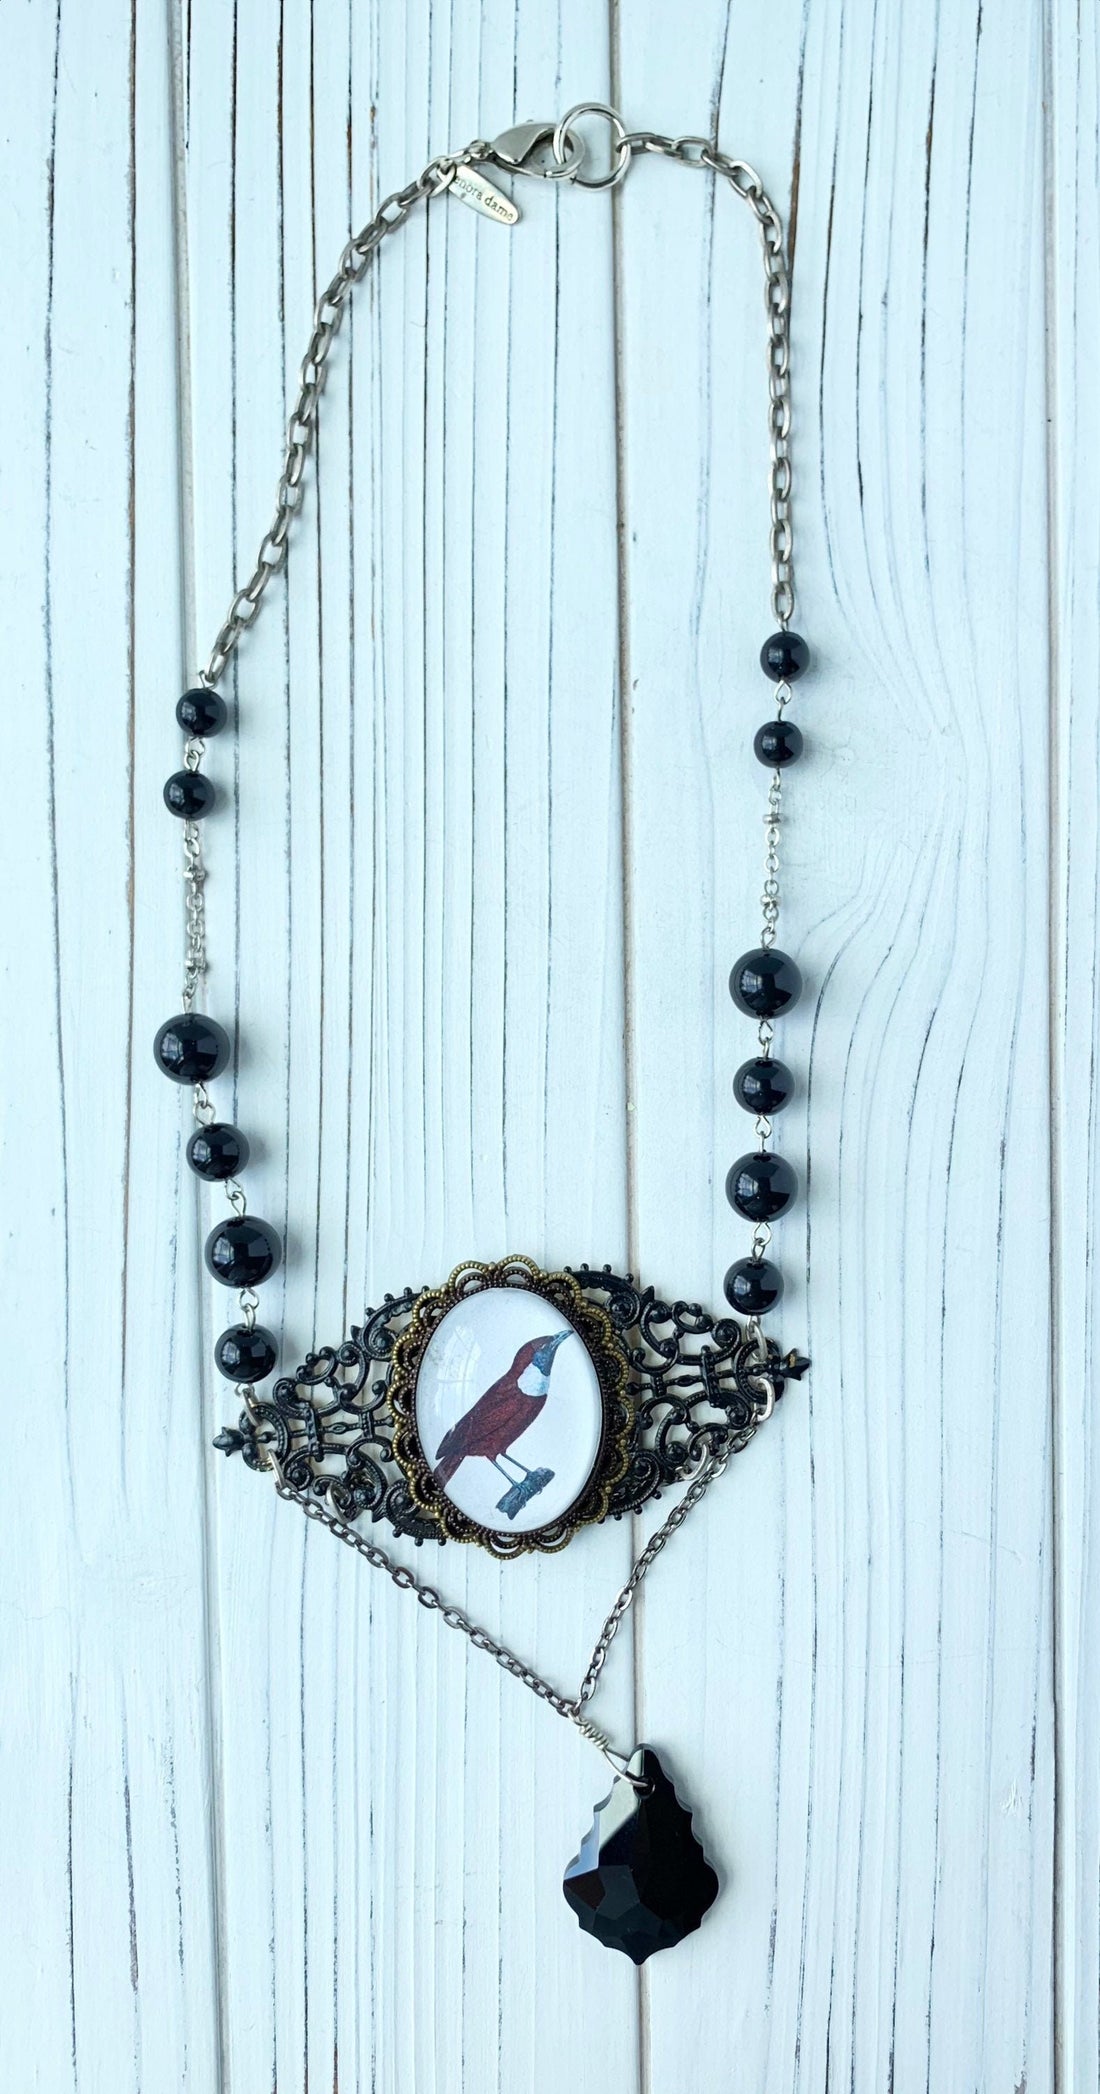 Lenora Dame necklace with a raven picture under a domed glass lens mounted on two layers of brass filigree hand painted black that hangs between silver chain with round shiny black beads. A black faceted irregular shaped teardrop glass pendant hangs from two layers of silver chain under the raven pendant.